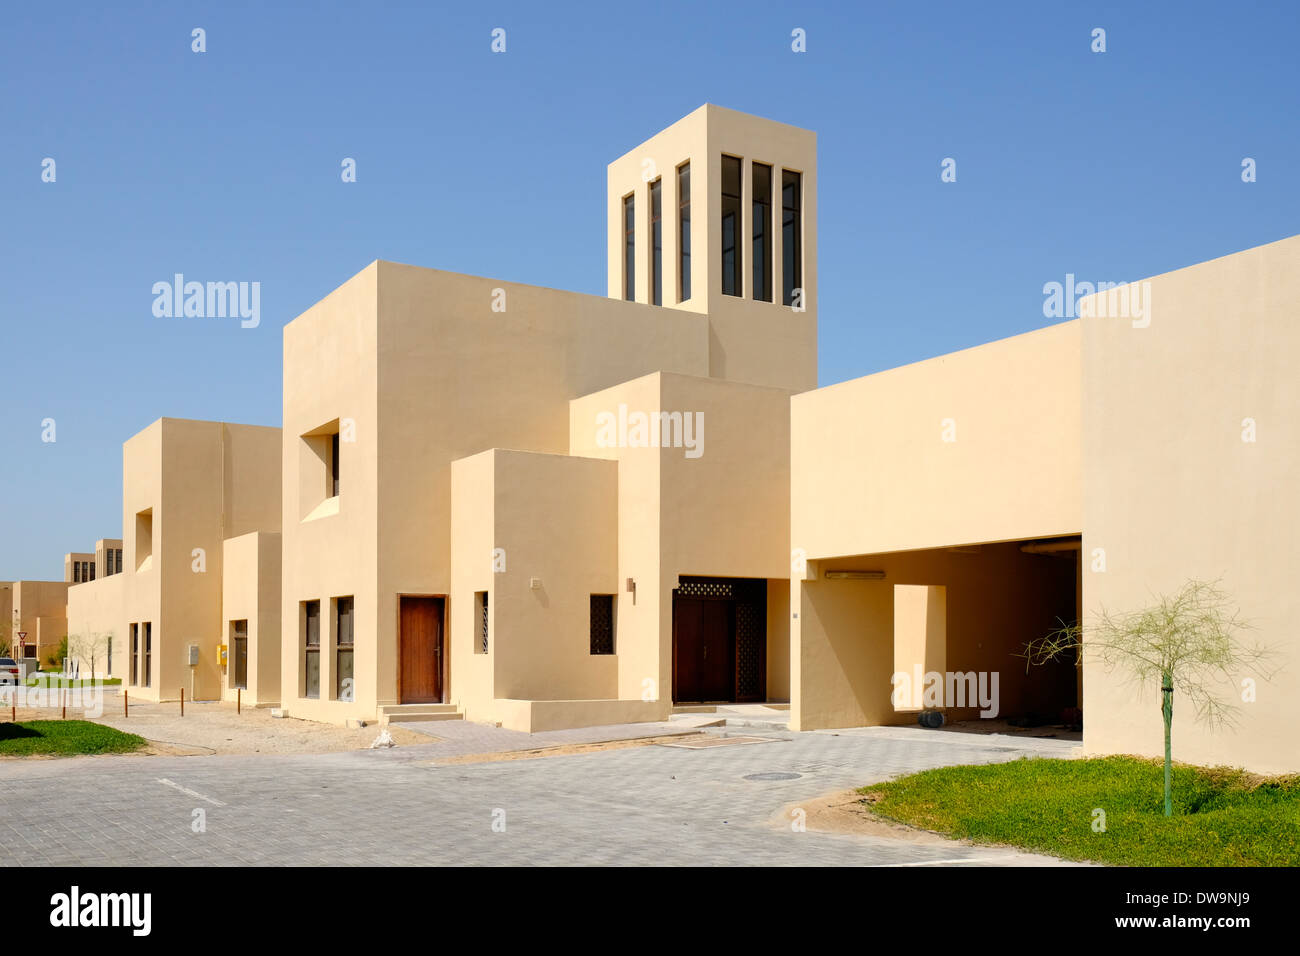 New villas in residential estate built for local Emirati families on Yas Island in Abu Dhabi United Arab Emirates Stock Photo